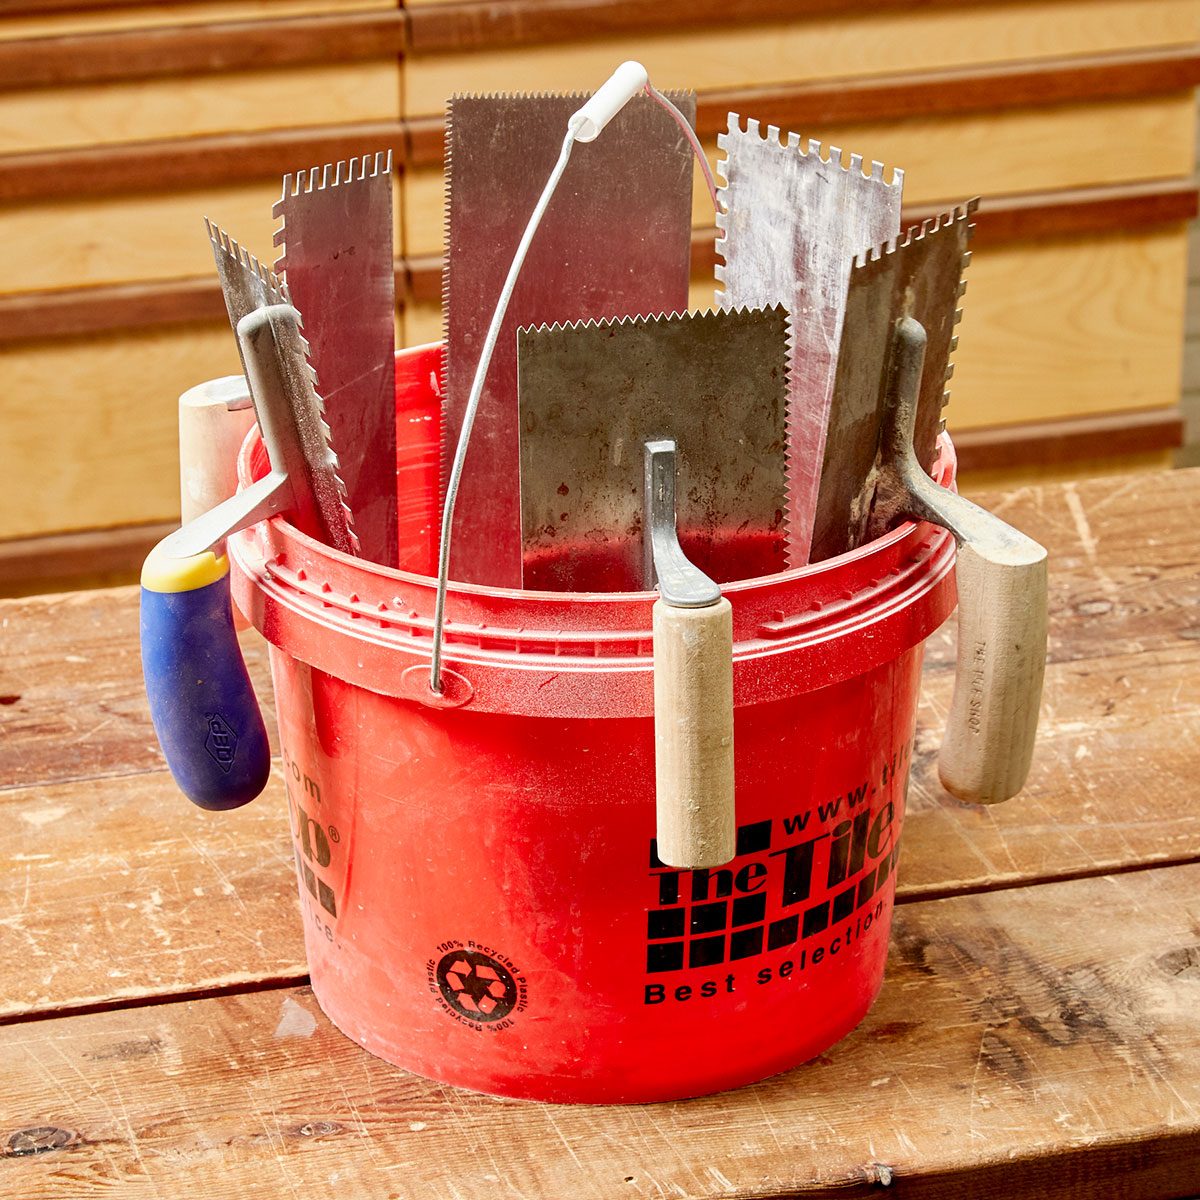 The Best Way To Organize Your Trowels | Family Handyman